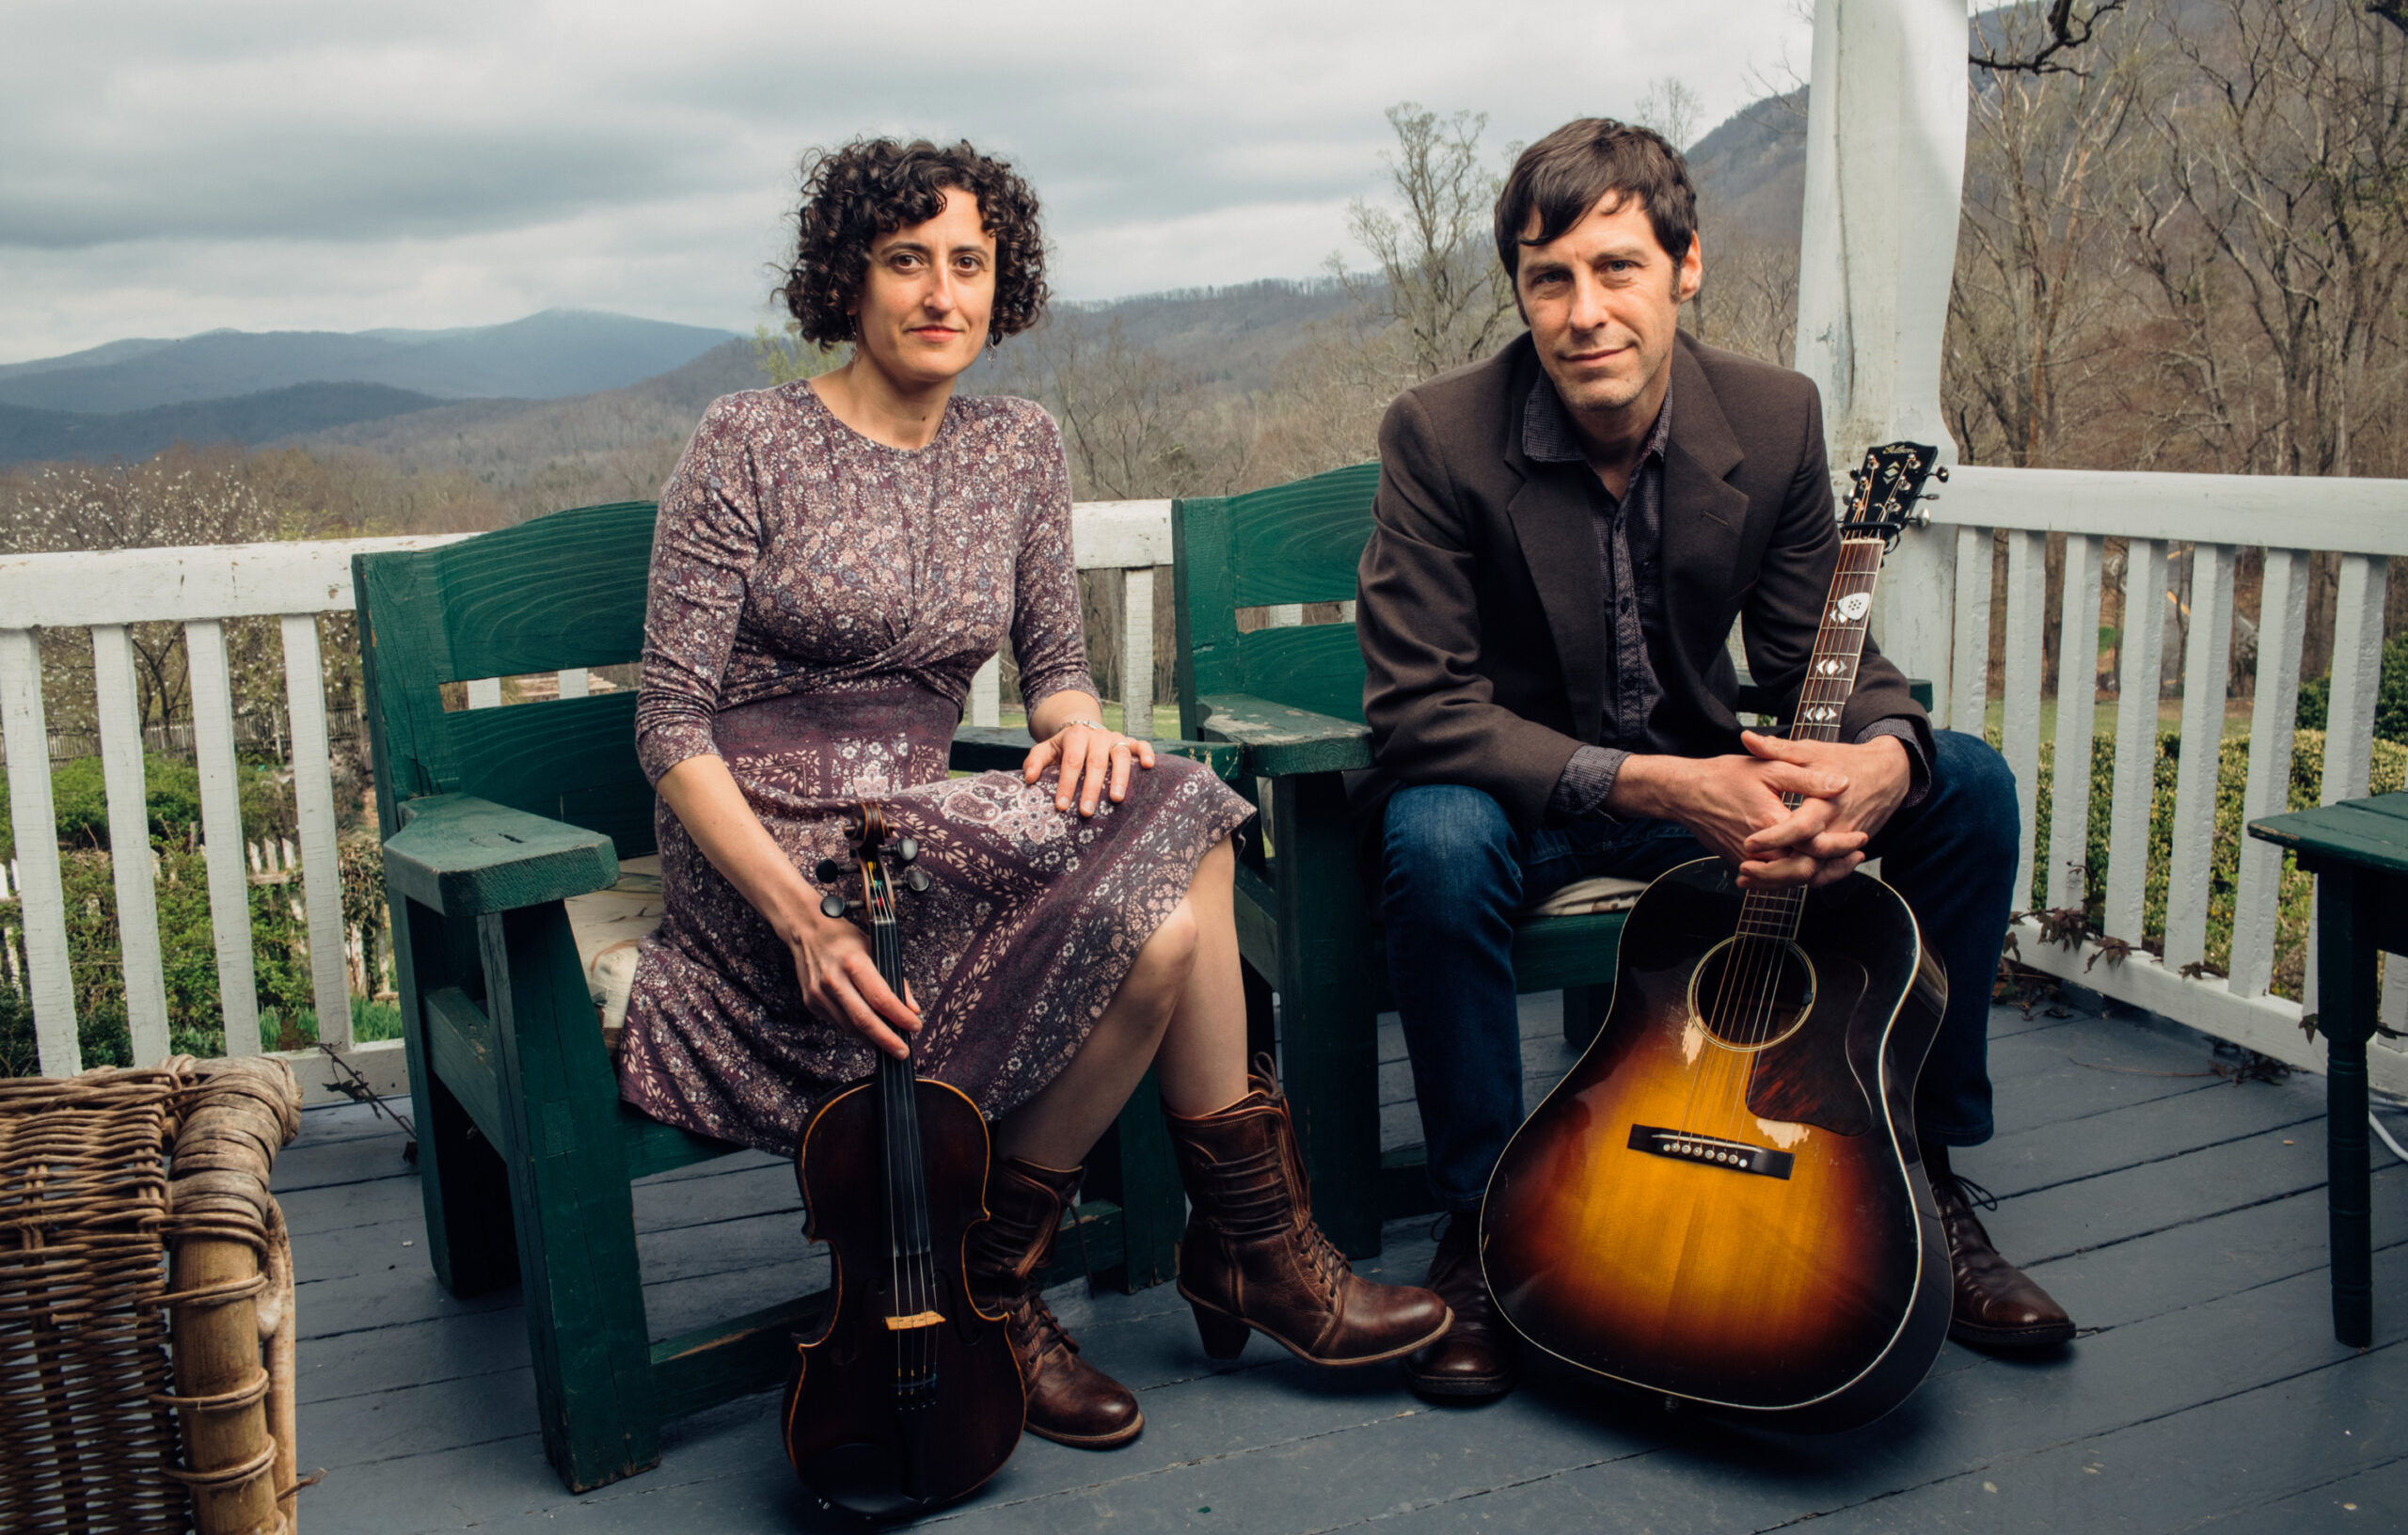 Zoe and Cloyd sit on a porch with their instruments, the mountains in the distance. Photo by Sandlin Gaither.